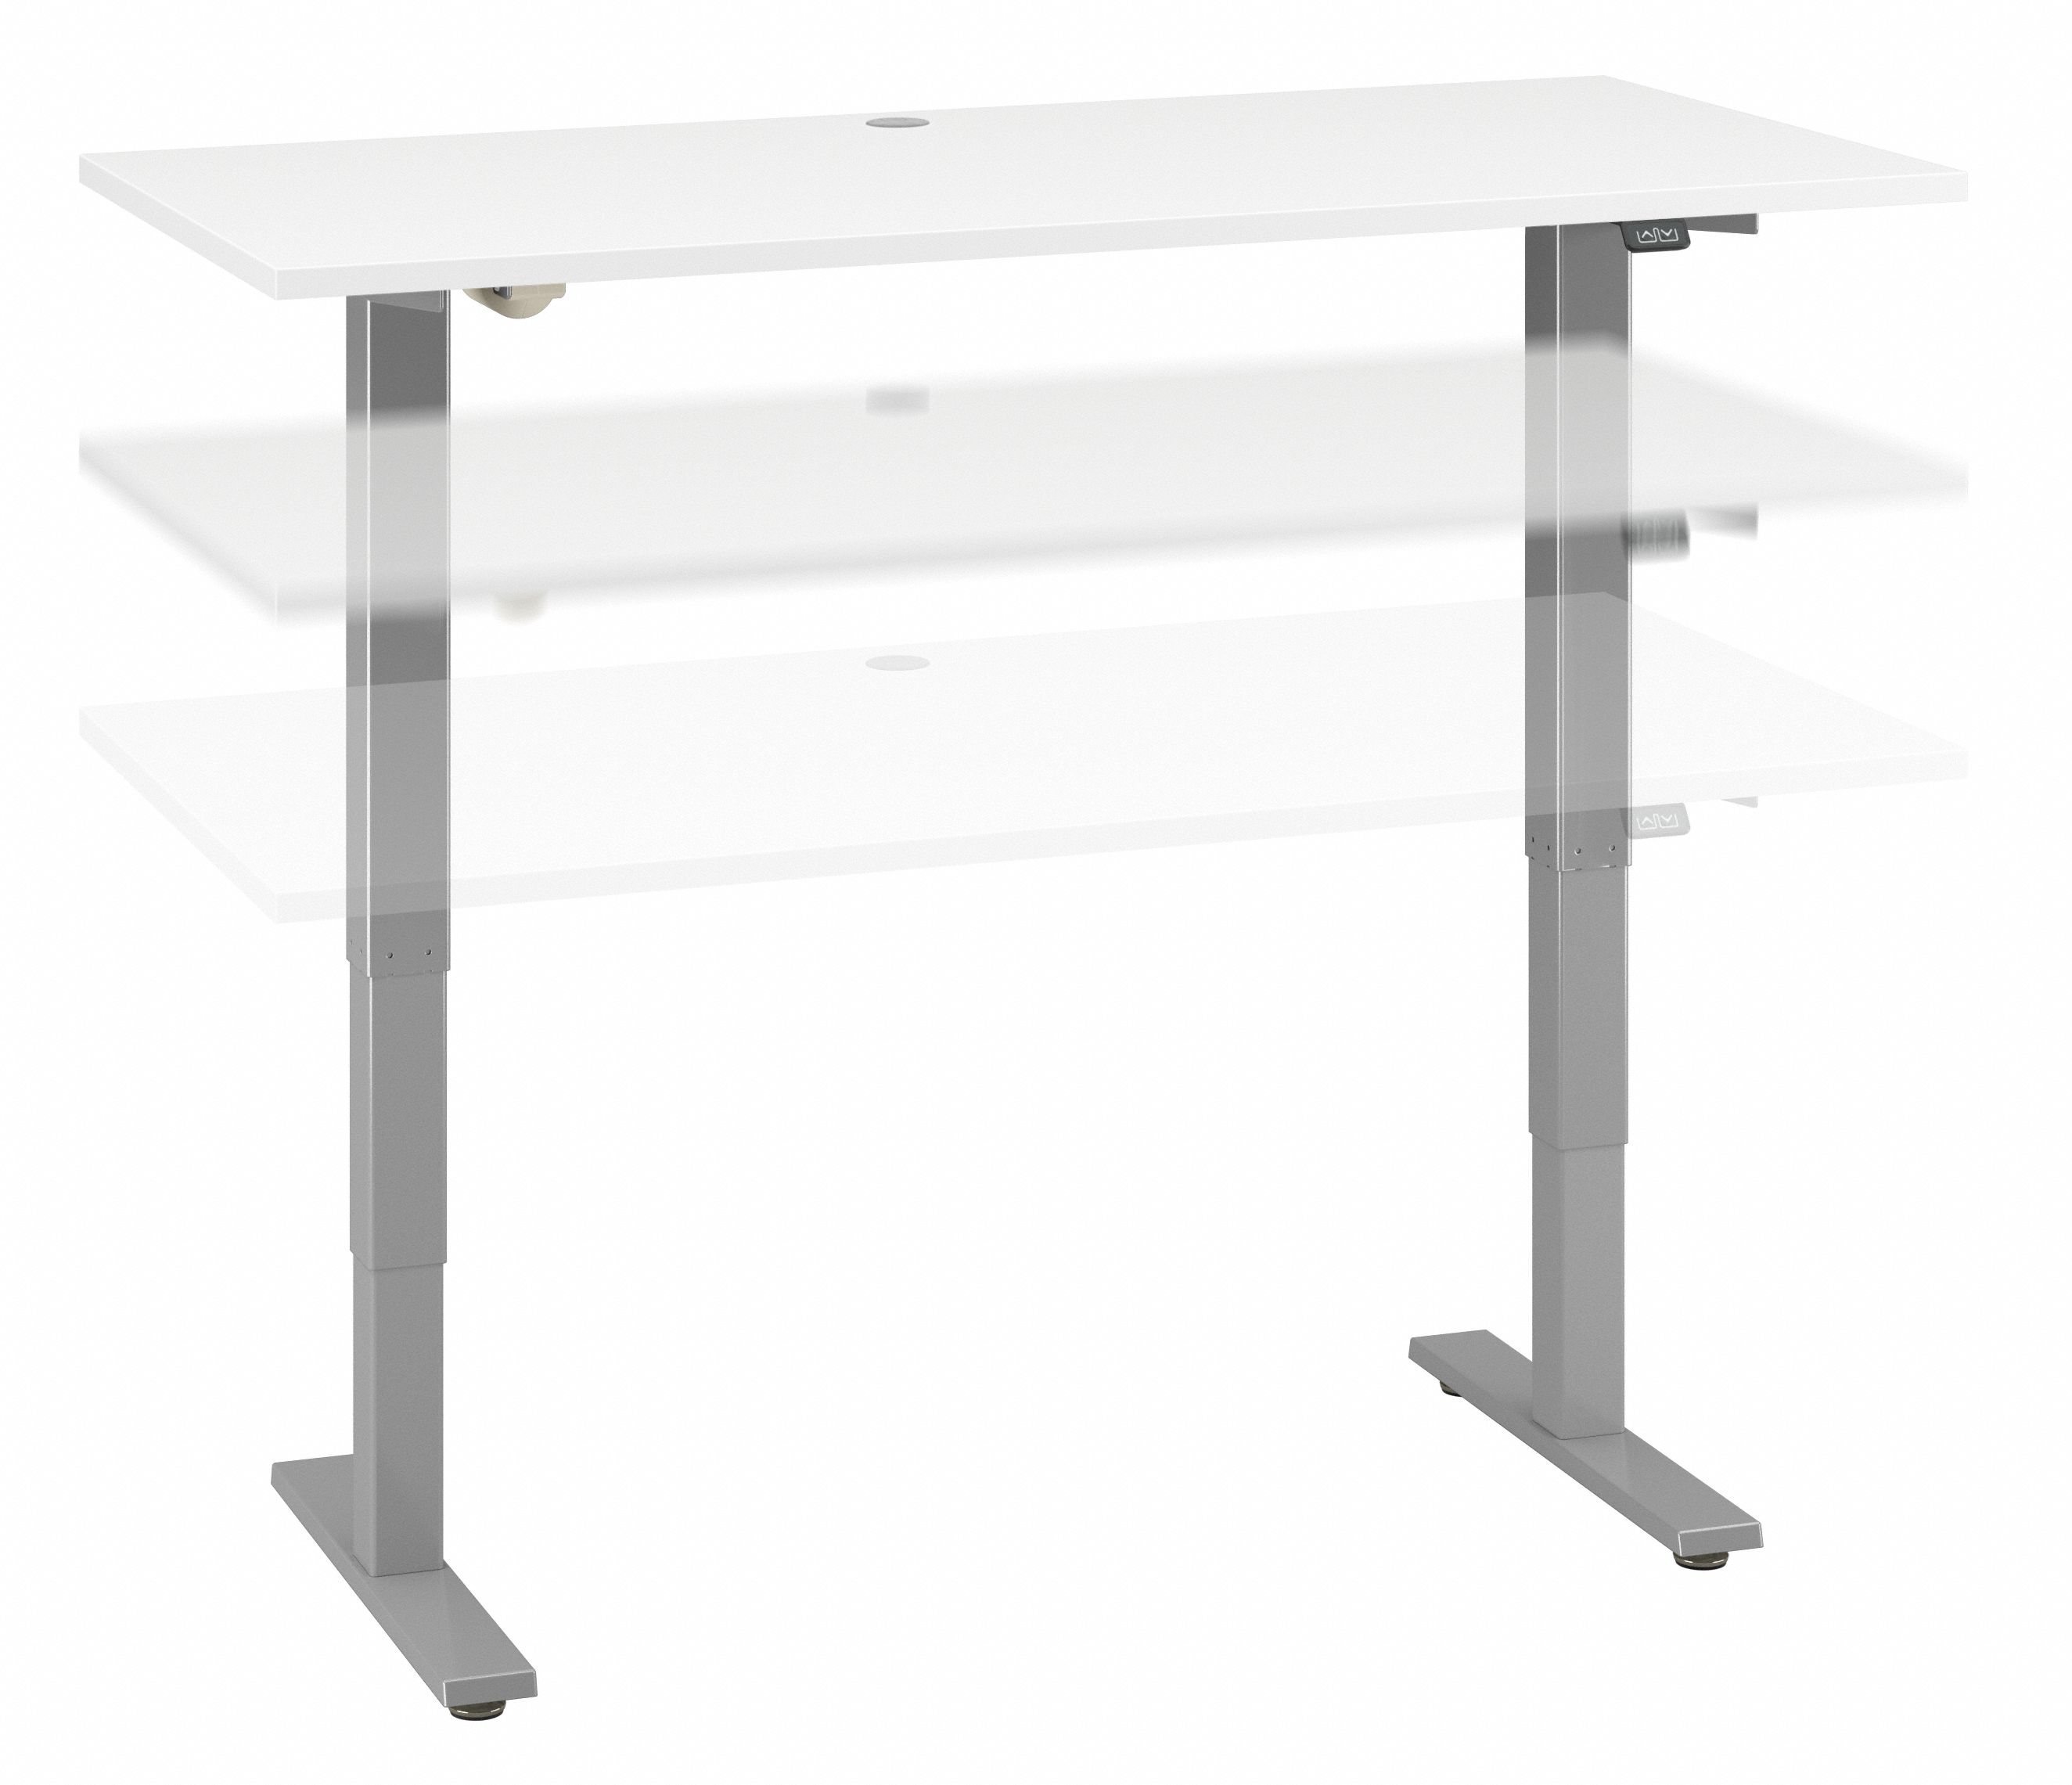 Shop Bush Furniture Cabot 60W x 30D Electric Height Adjustable Standing Desk 02 WC31912K #color_white/cool gray metallic